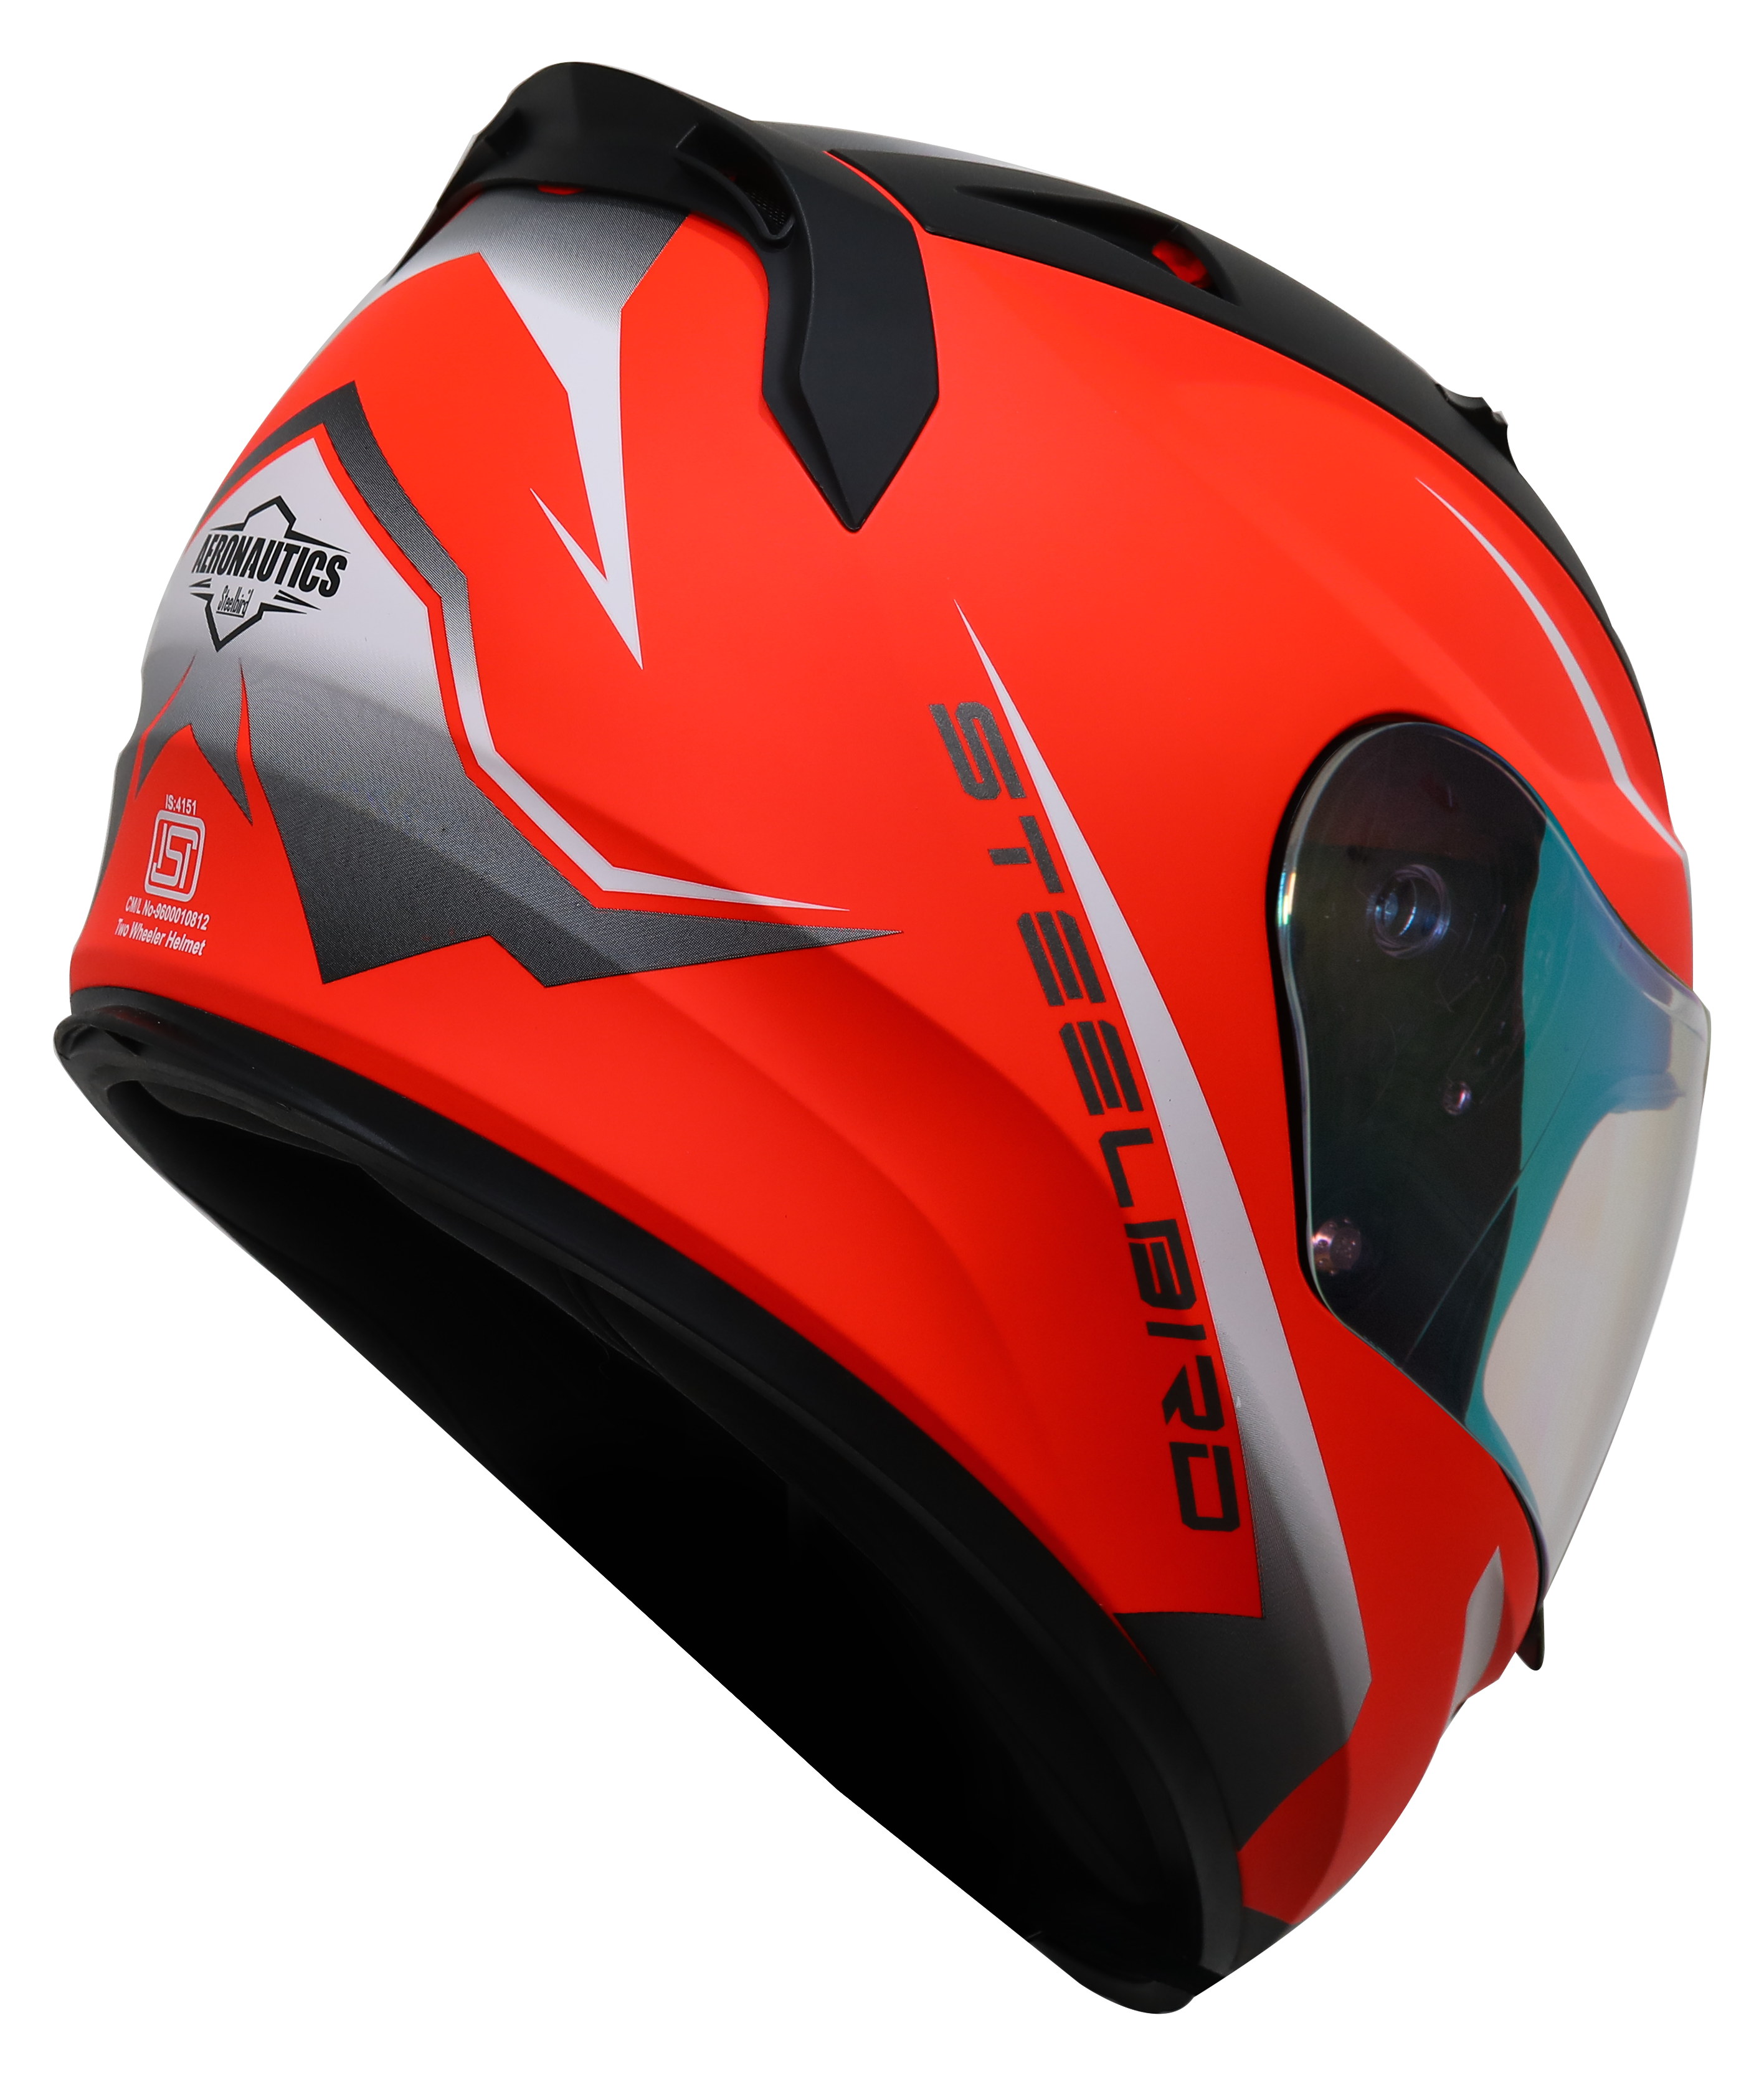 SA-1 WHIF GLOSSY FLUO RED WITH WHITE NIGHT VISION GOLD VISOR (WITH EXTRA FREE CLEAR VISOR)